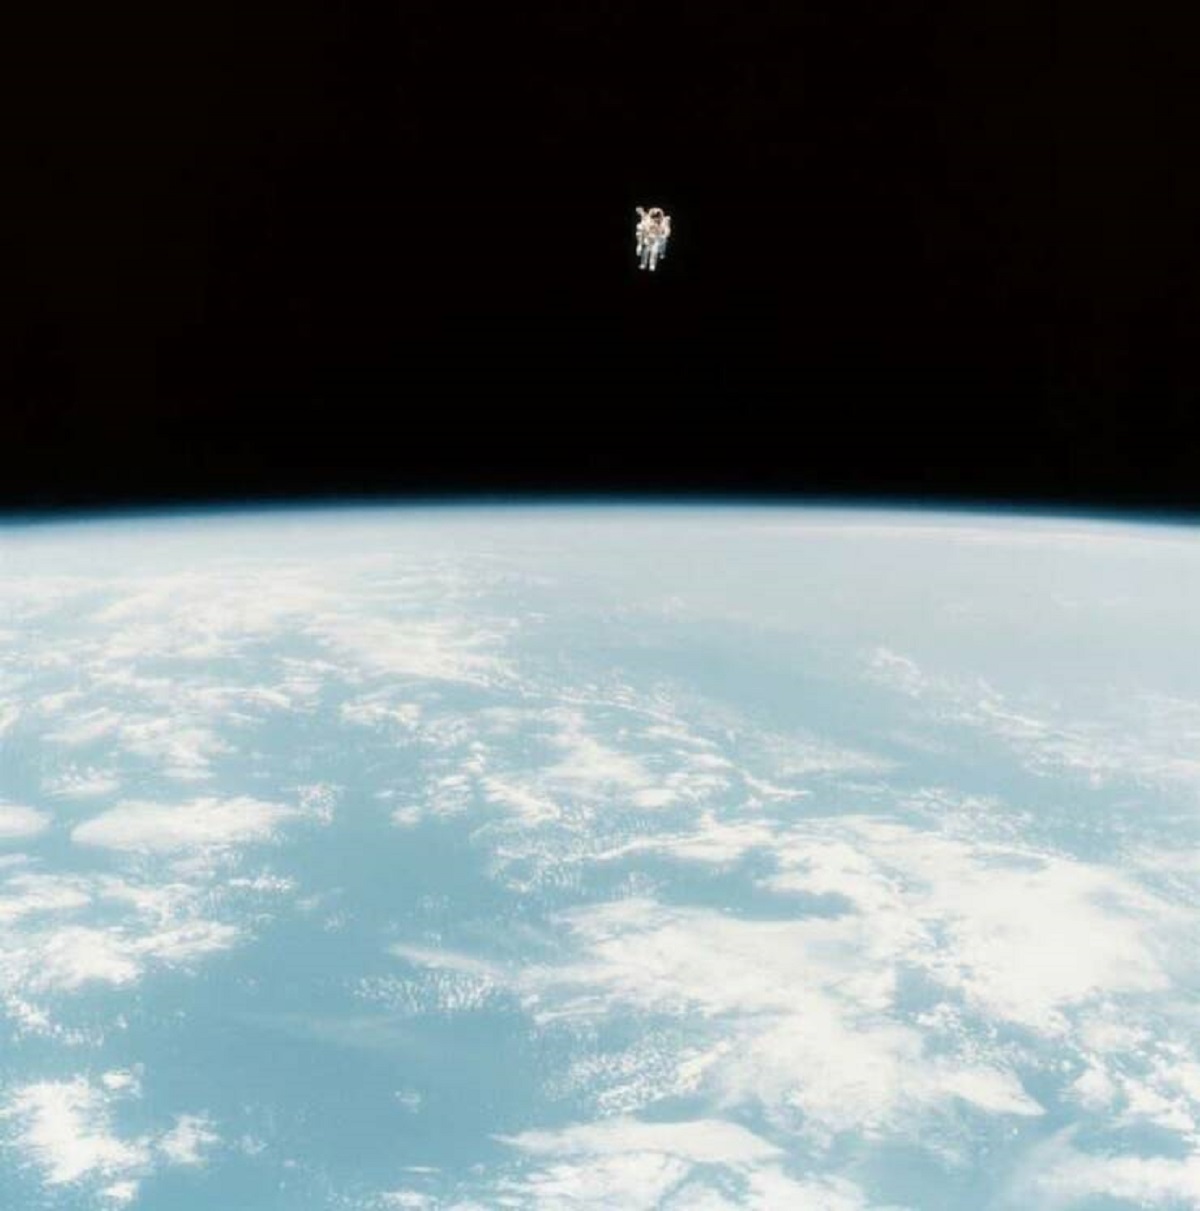 On Feb. 7, 1984, Bruce McCandless II performed the first-ever untethered space walk, and folks, it looks absolutely terrifying: